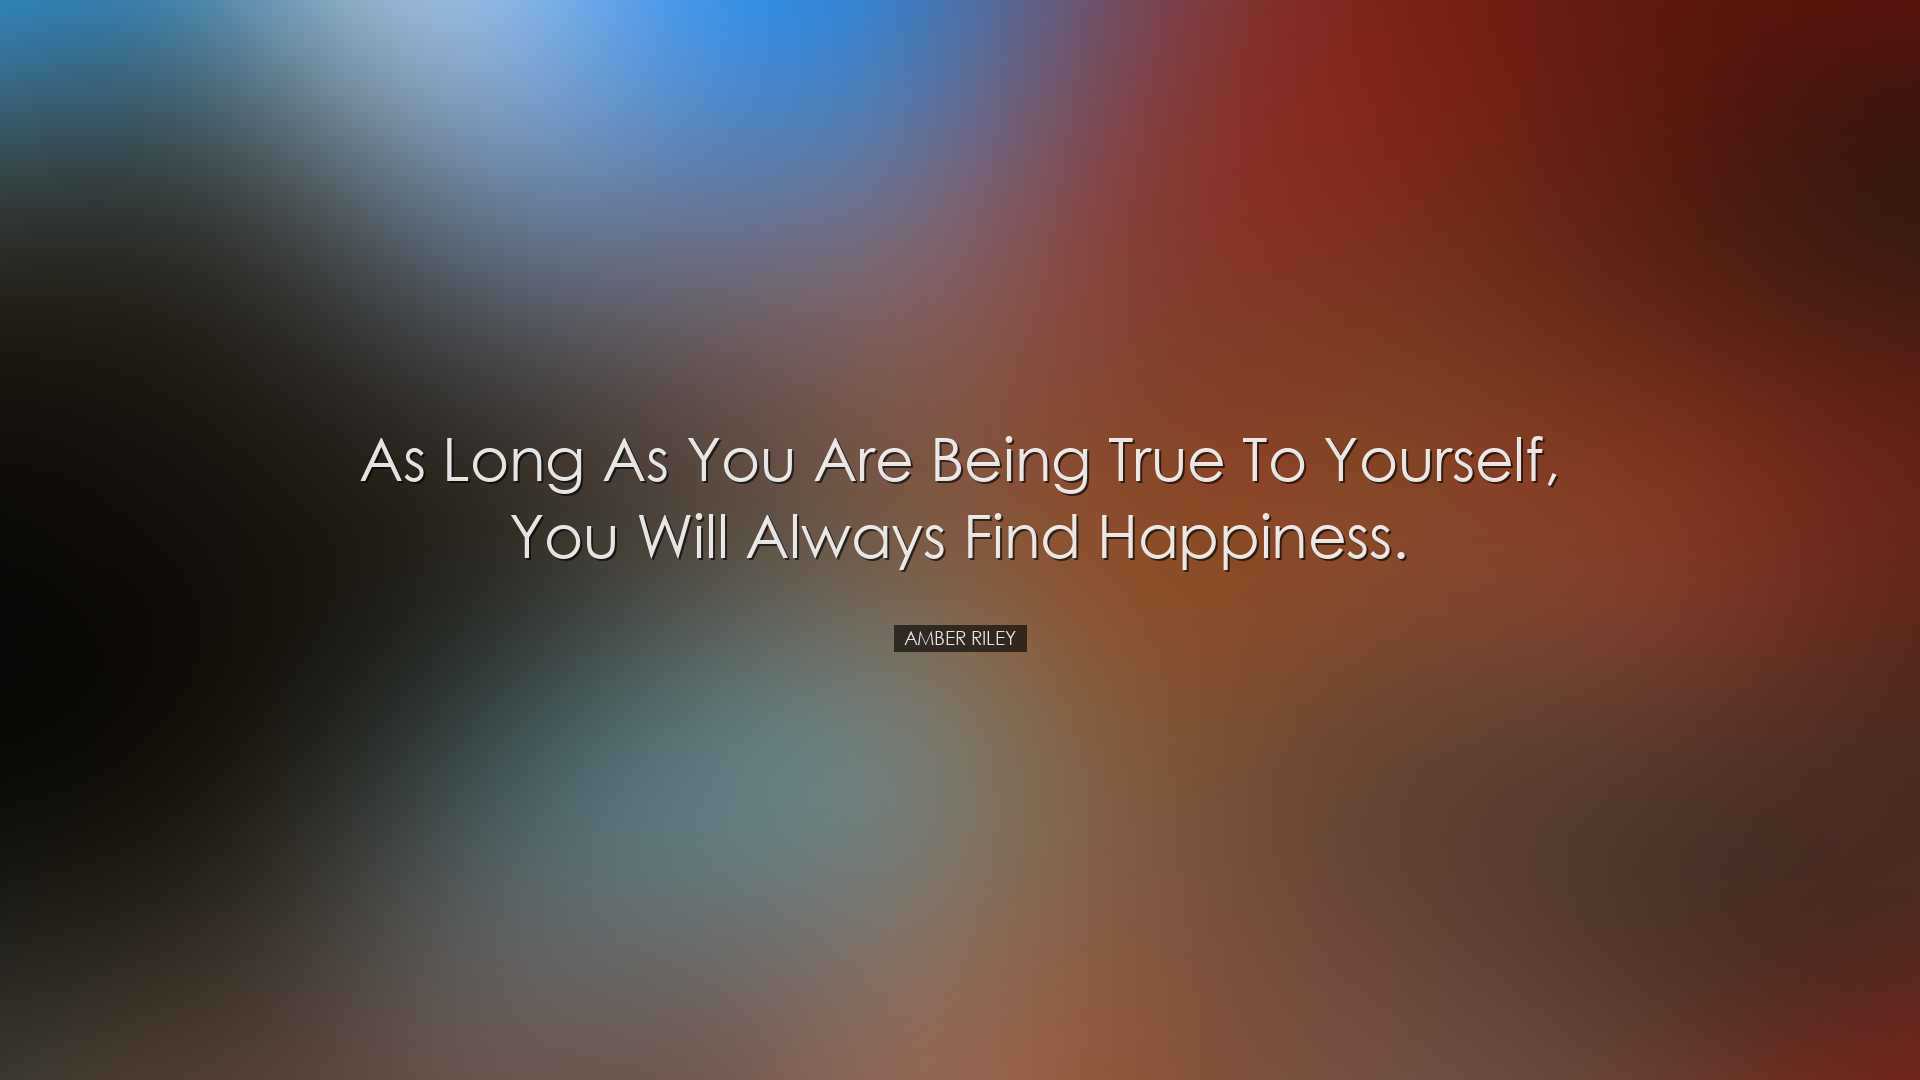 As long as you are being true to yourself, you will always find ha